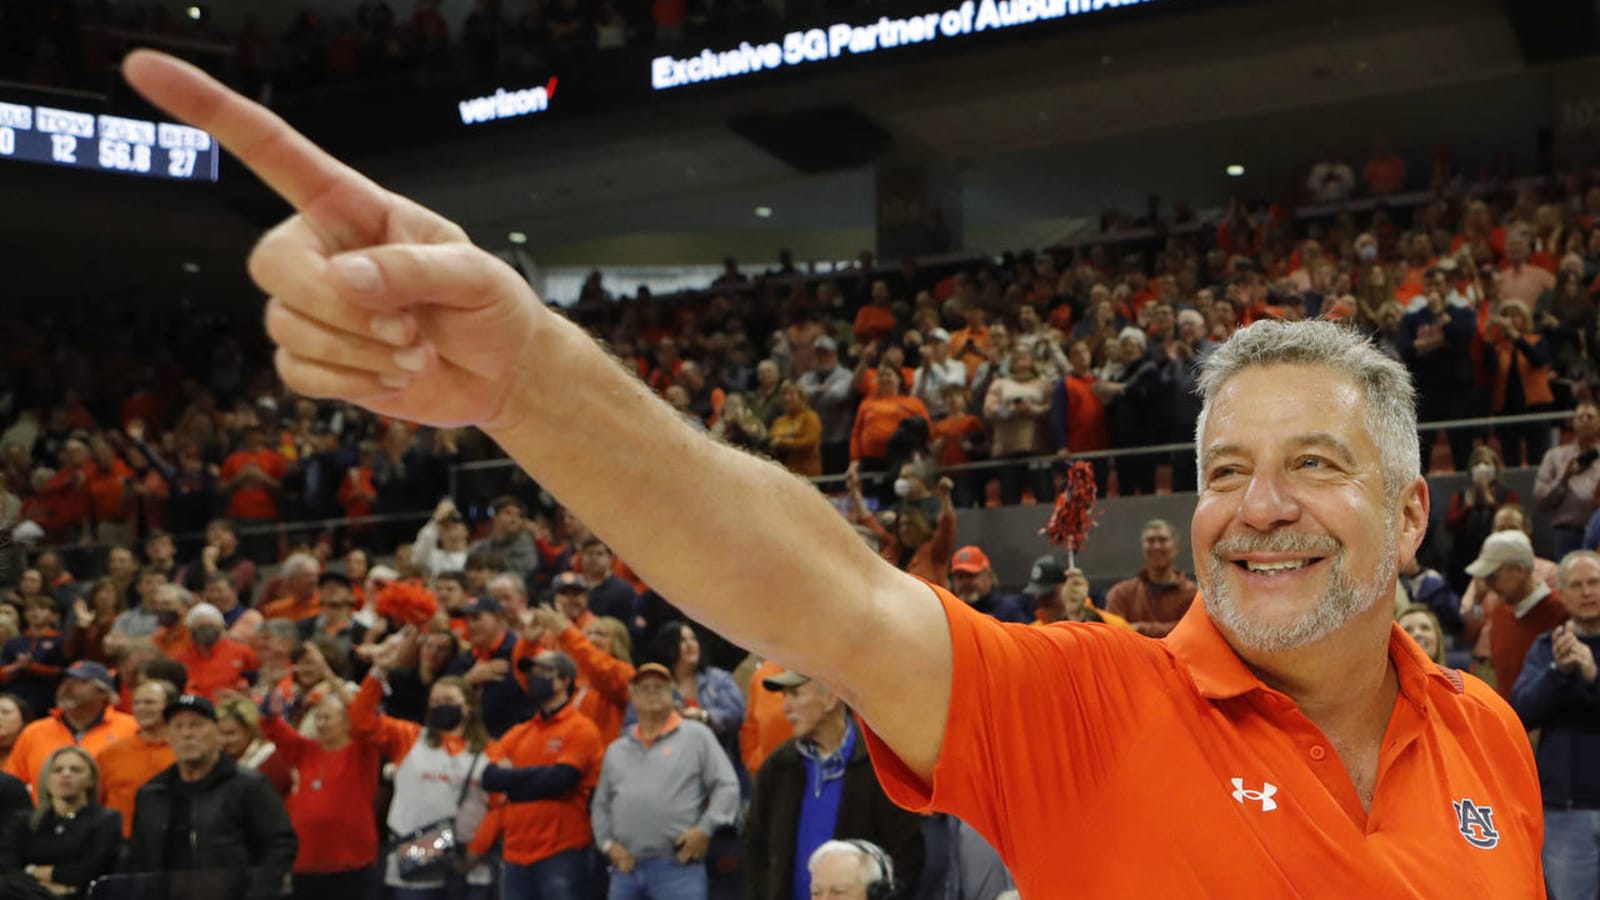 Bruce Pearl makes funny recruiting pitch after beating Kentucky